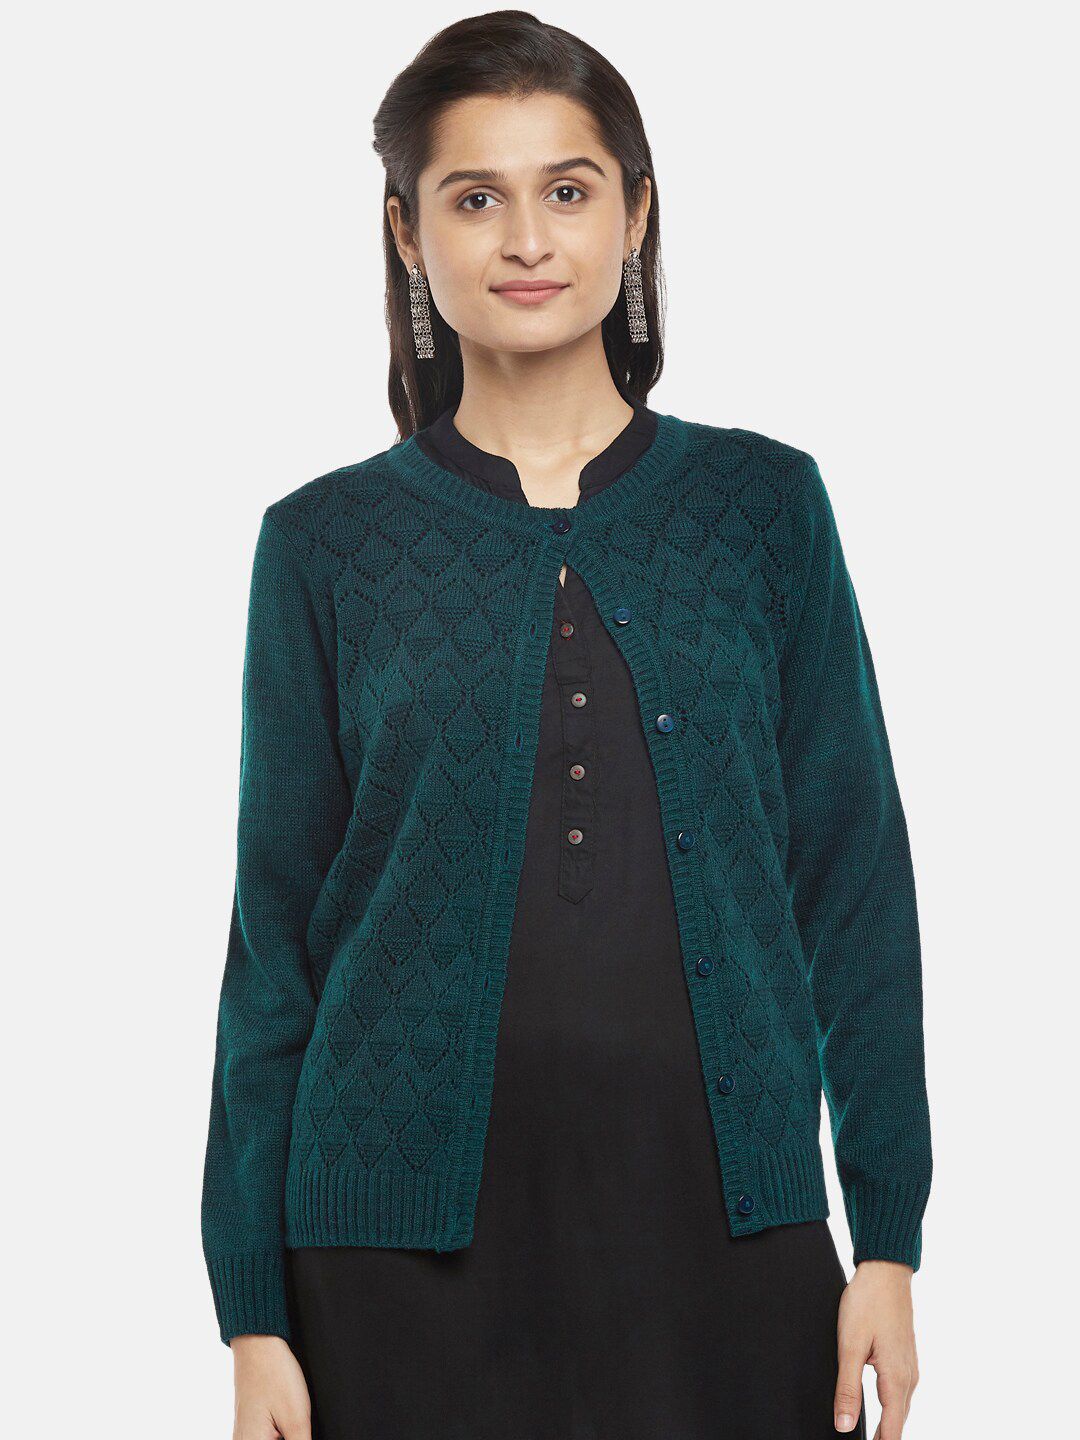 RANGMANCH BY PANTALOONS Women Teal Cable Knit Acrylic Cardigan Price in India